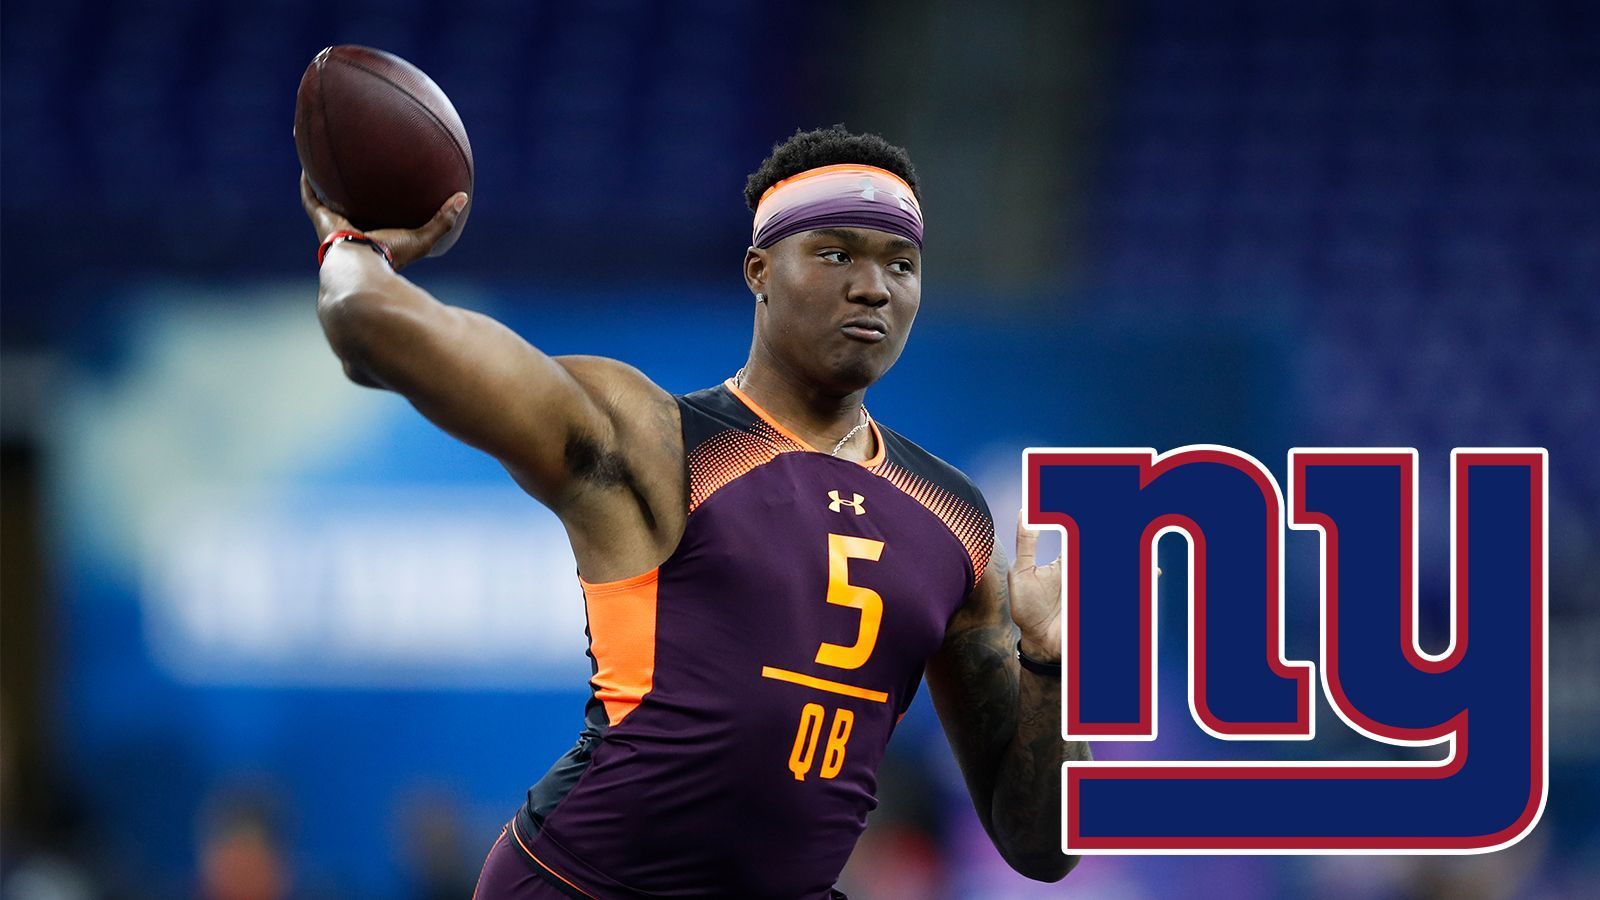 
                <strong>Pick 6: Dwayne Haskins - New York Giants</strong><br>
                Position: QuarterbackCollege: Ohio State
              